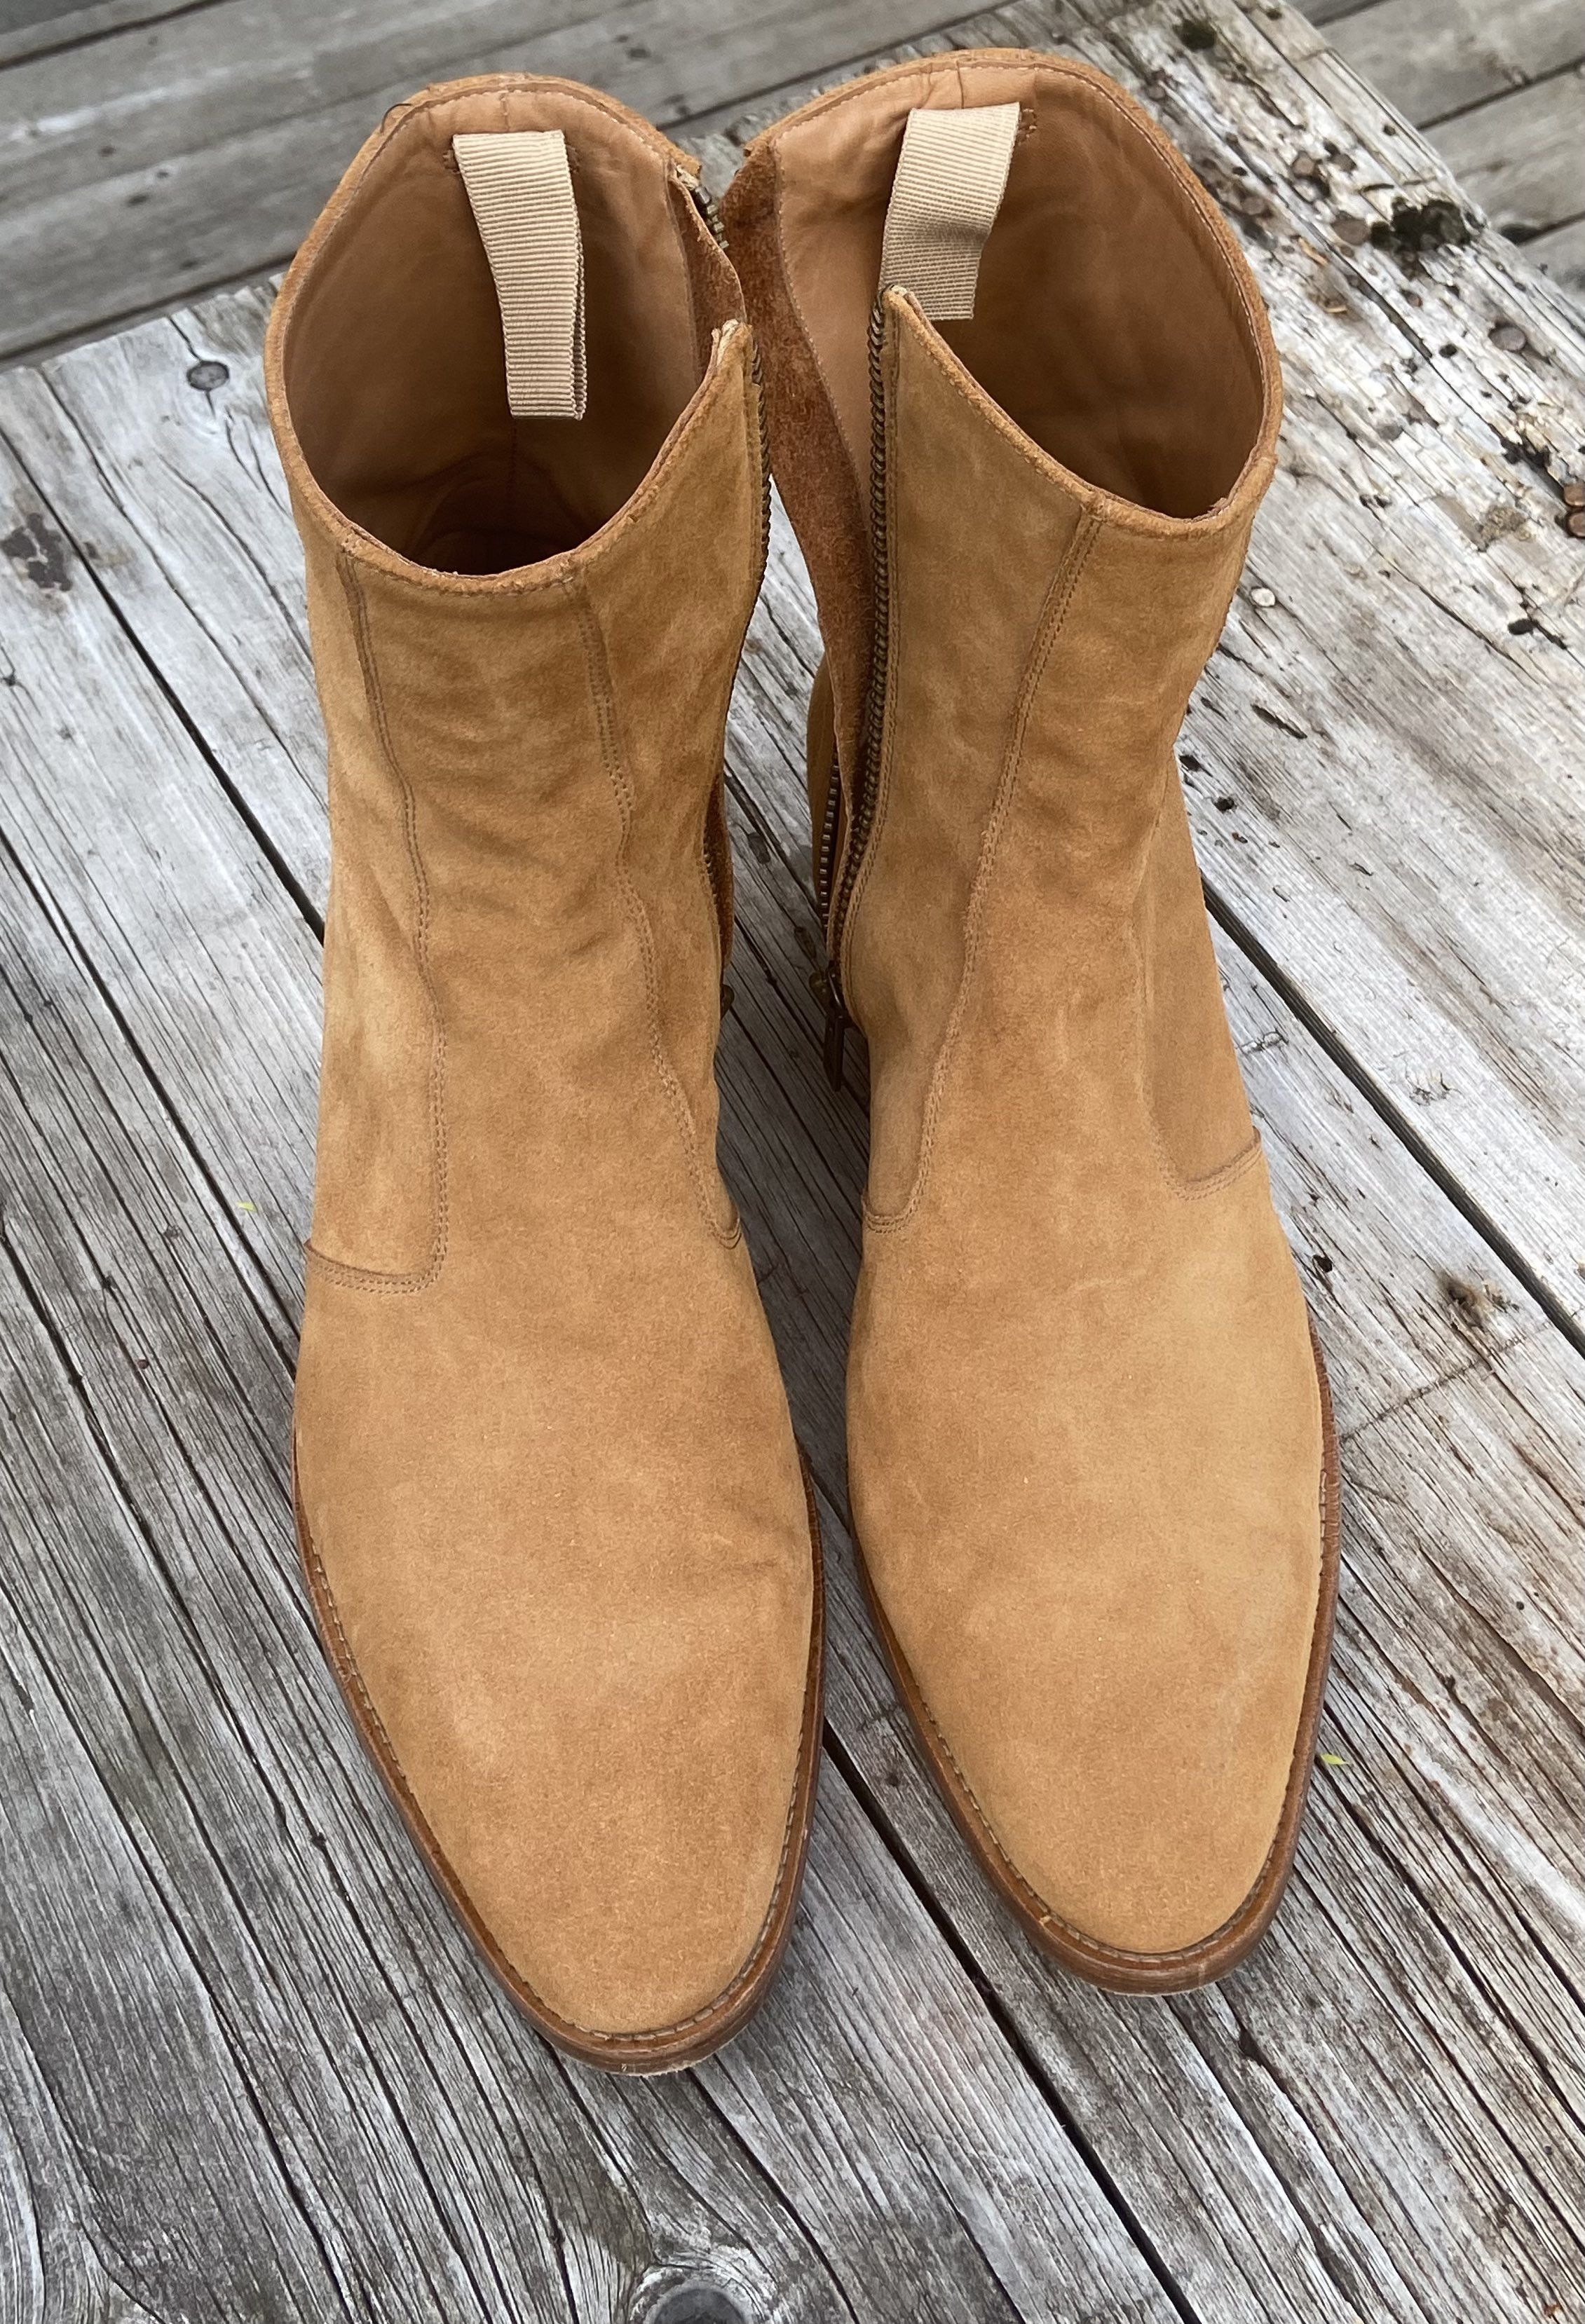 From The First Luca 40mm Side Zip Boot in Camel Suede | Grailed